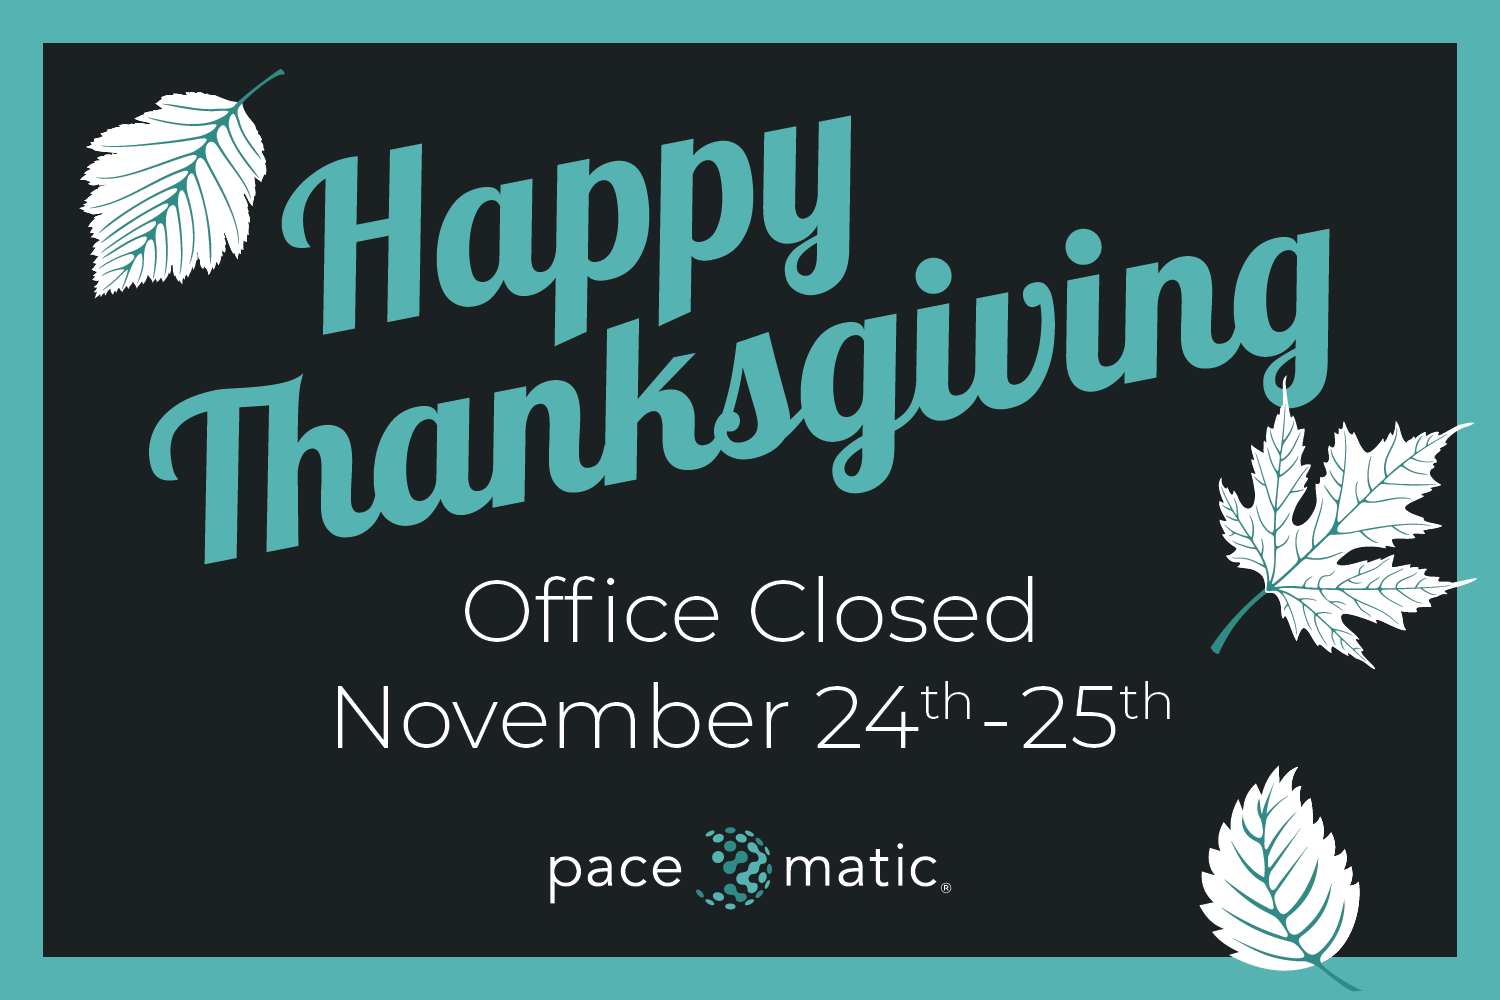 Happy Thanksgiving, office closed November 24-25